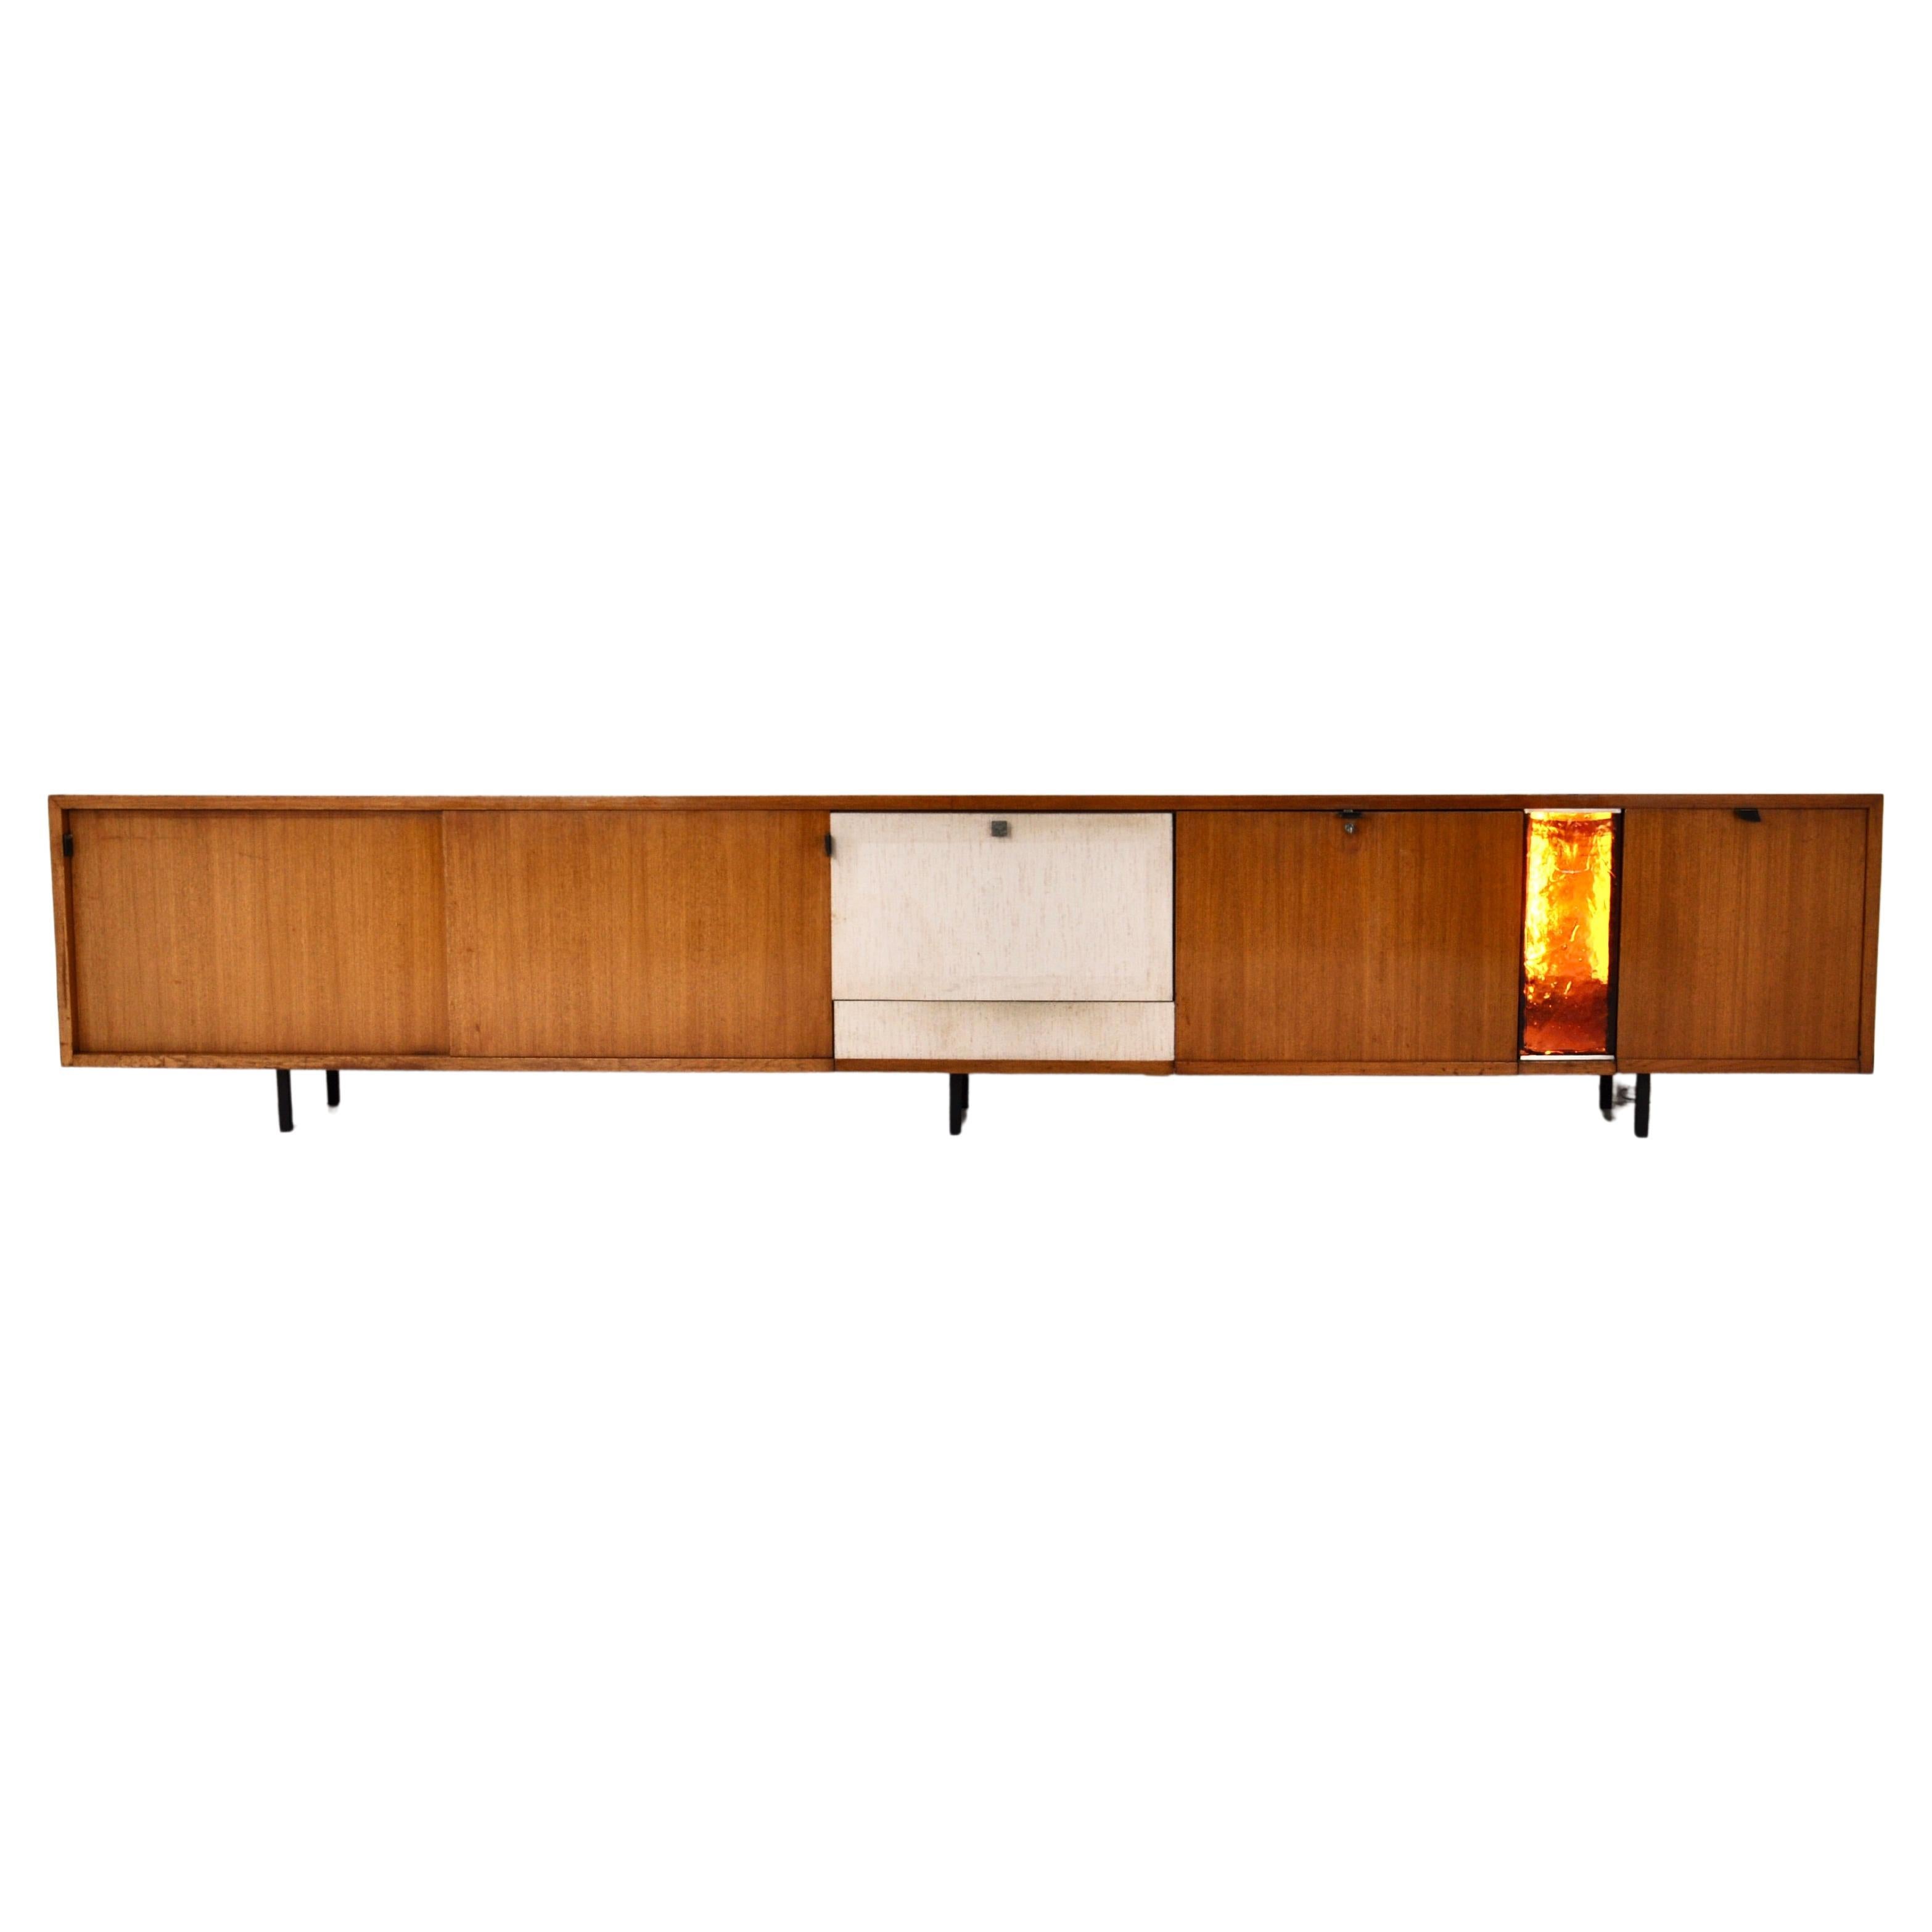 Sideboard by Florence Knoll Bassett for Knoll Inc, 1960s